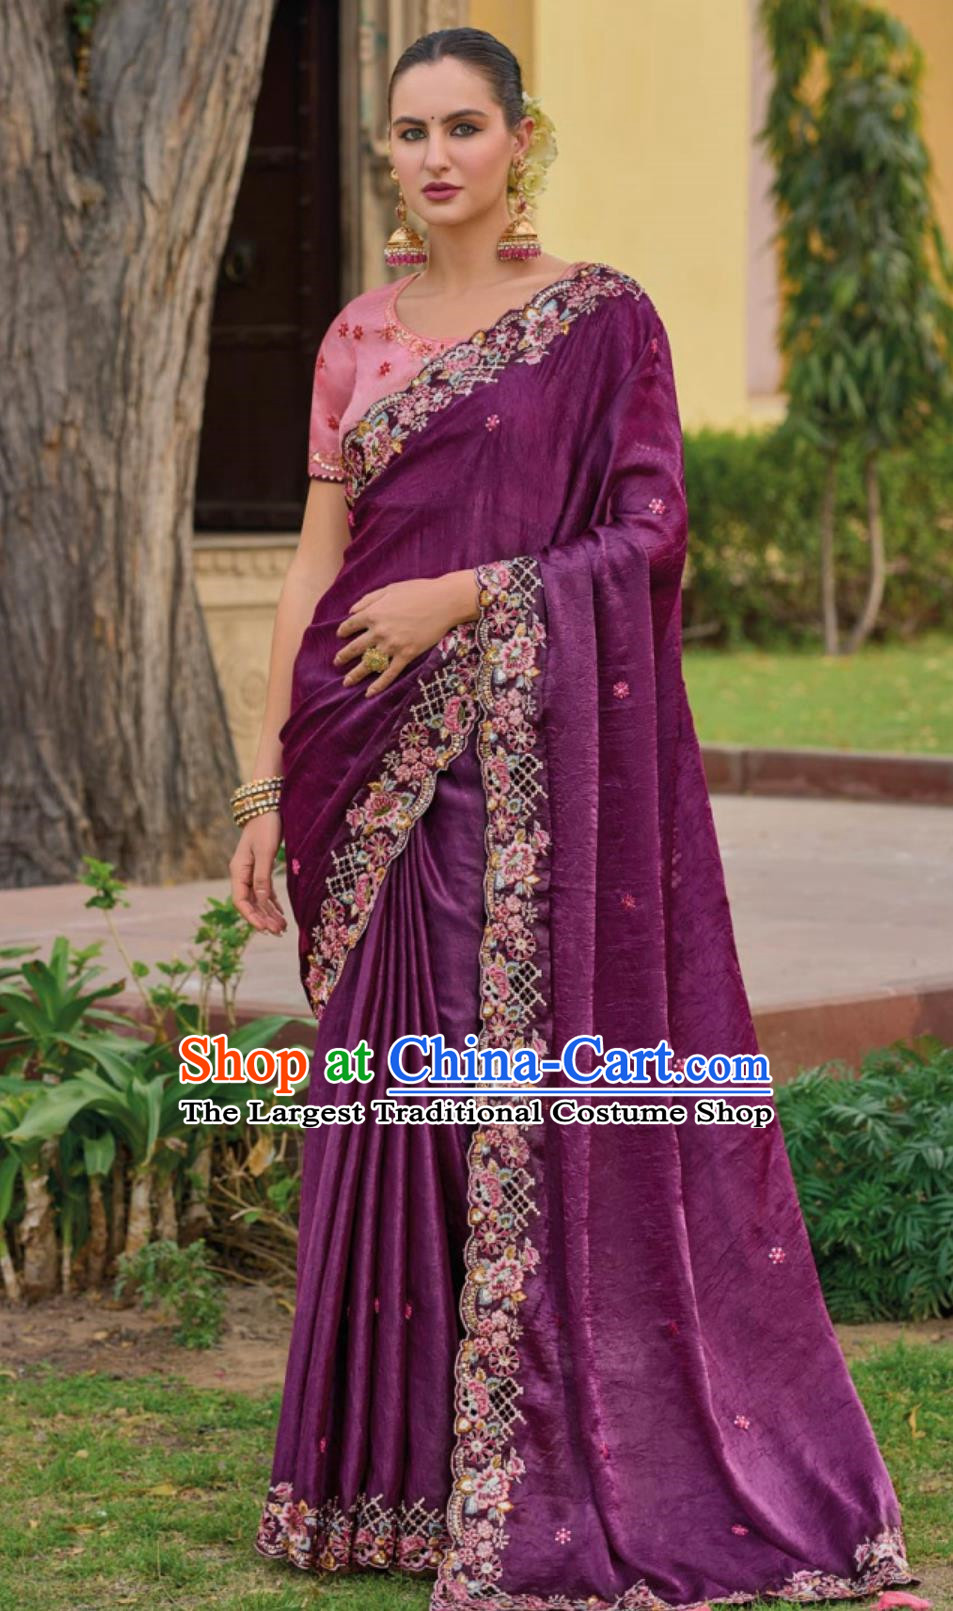 Hollow Embroidery Indian Saree National Ladies Purple Wrap Skirt Sari Festival Party Outfit